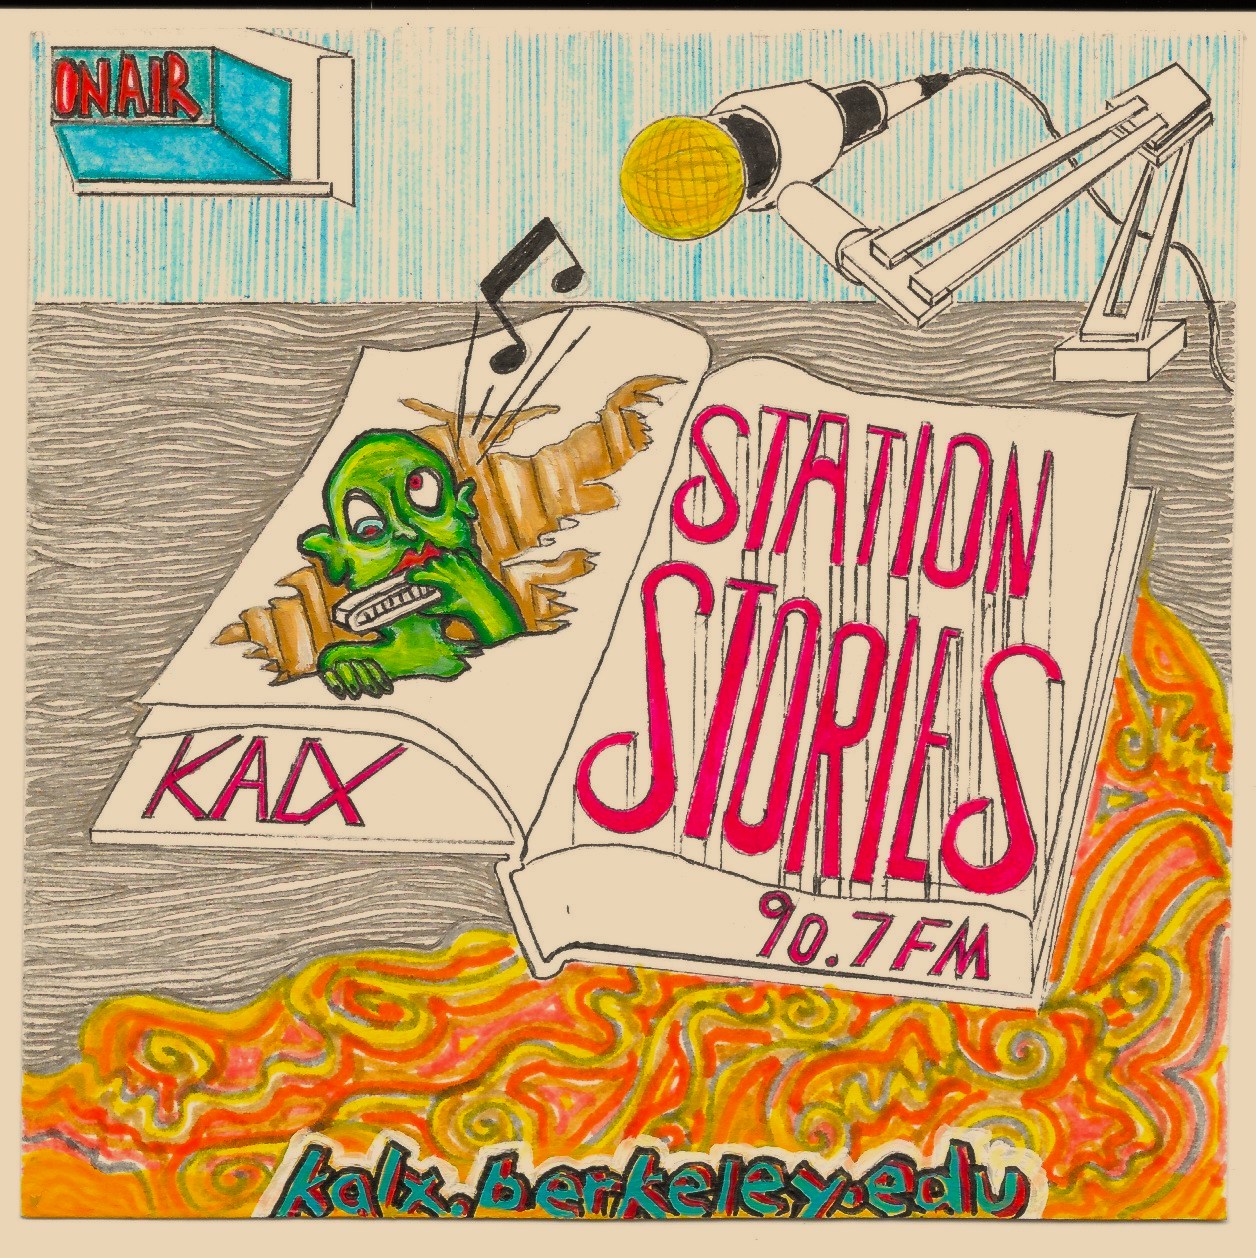 Station Stories